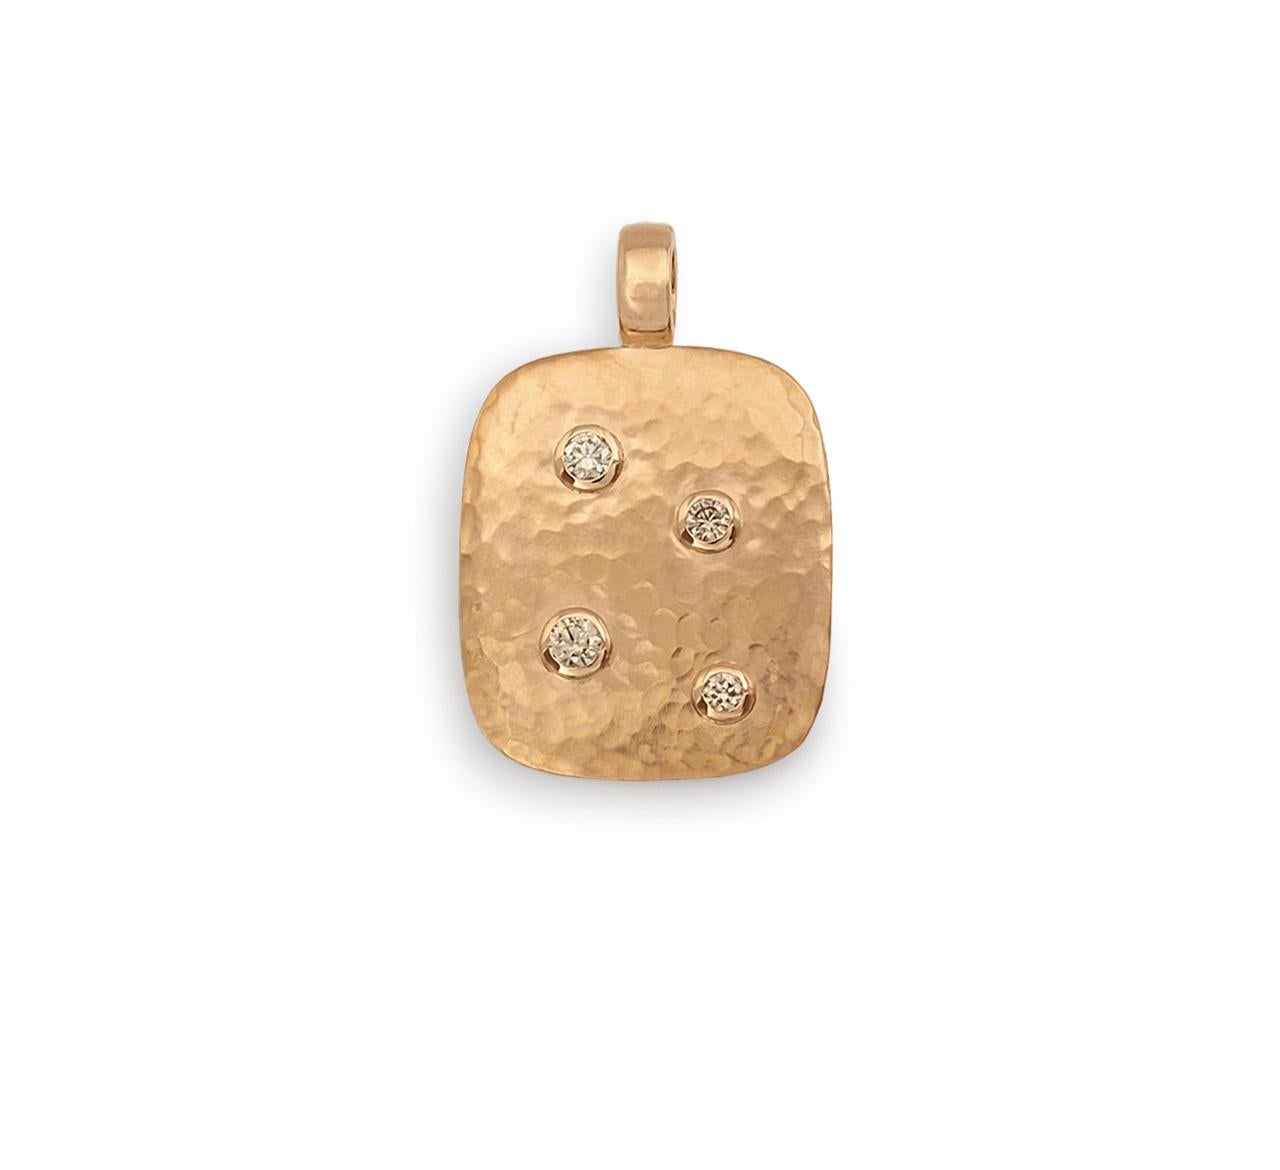 This pendant is hand hammered in 18 carat rose gold and set with 0,40 ct diamonds. It is designed by Colleen B. Rosenblat.